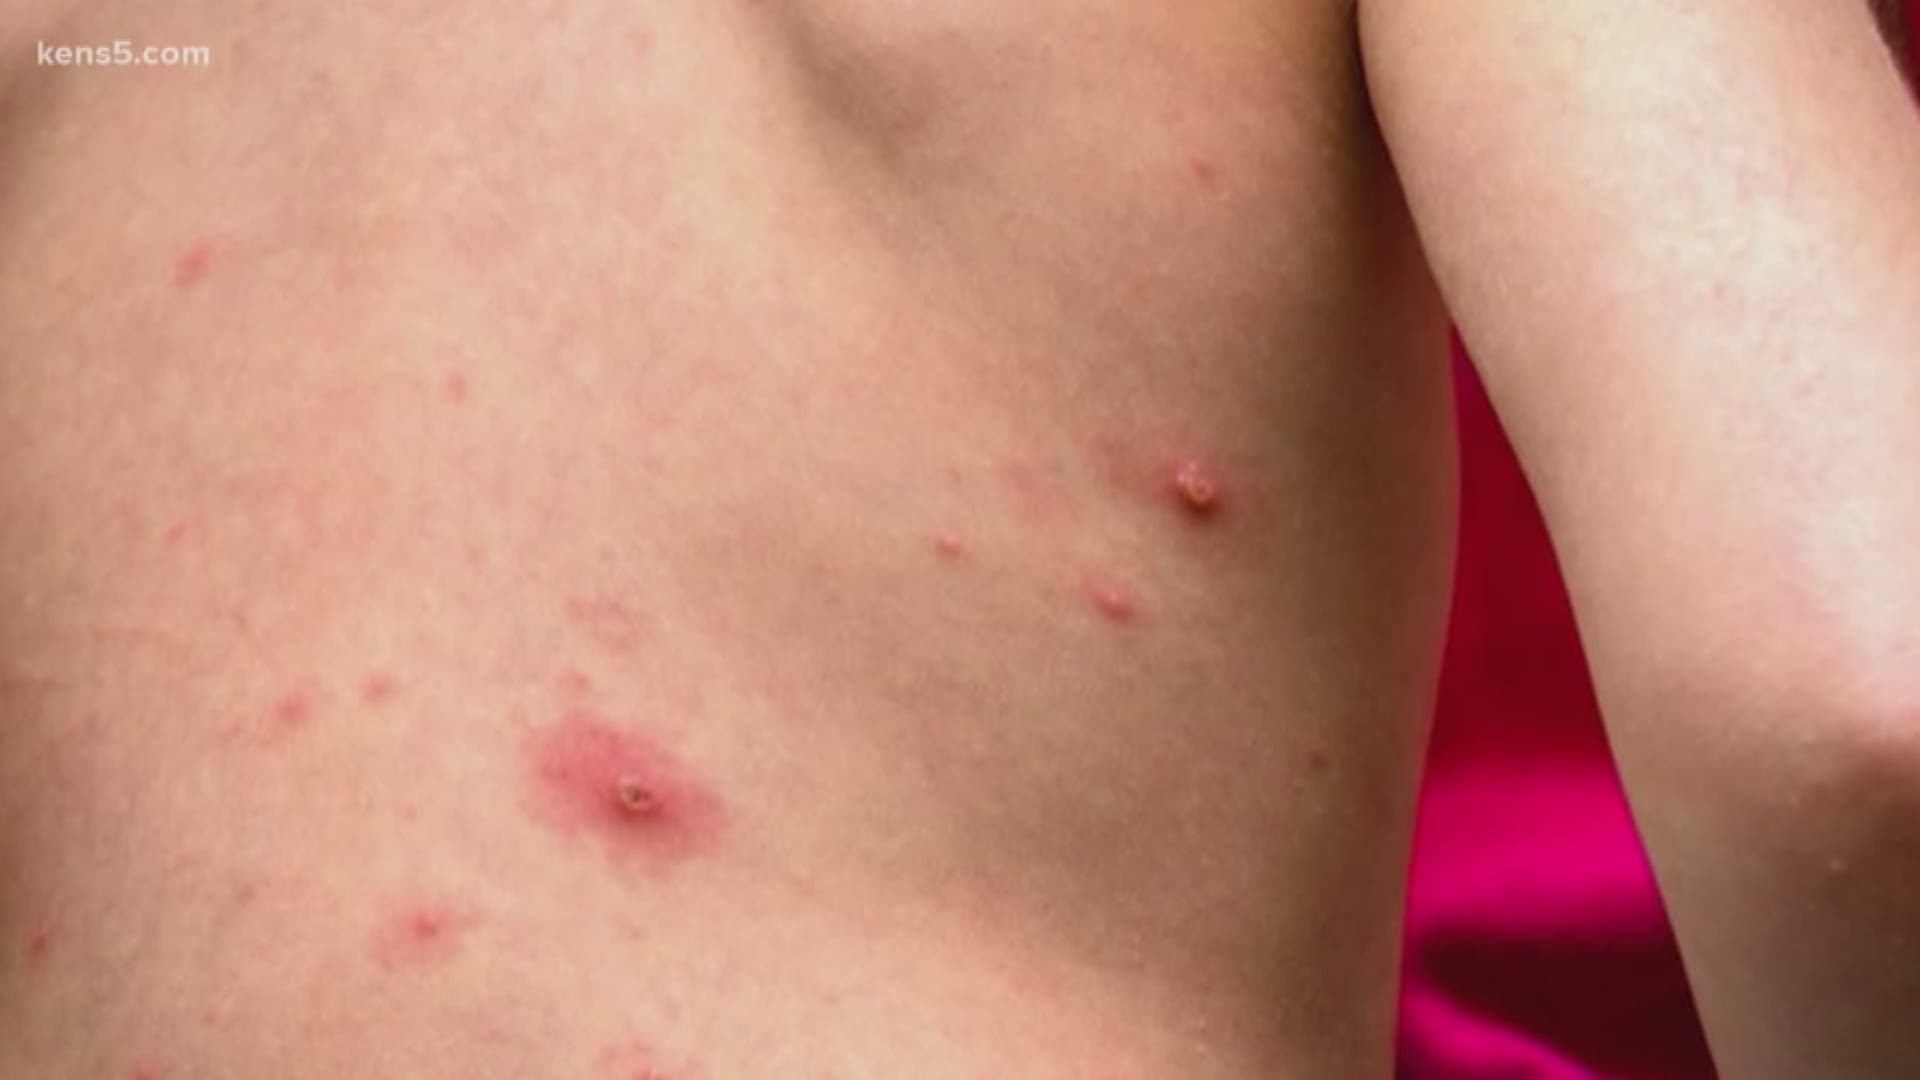 21 states, including Texas, have reported measles infections in 2018. So far, more than 100 people have contracted measles. Most of the patients were not vaccinated. Eyewitness News reporter Jeremy Baker has more.